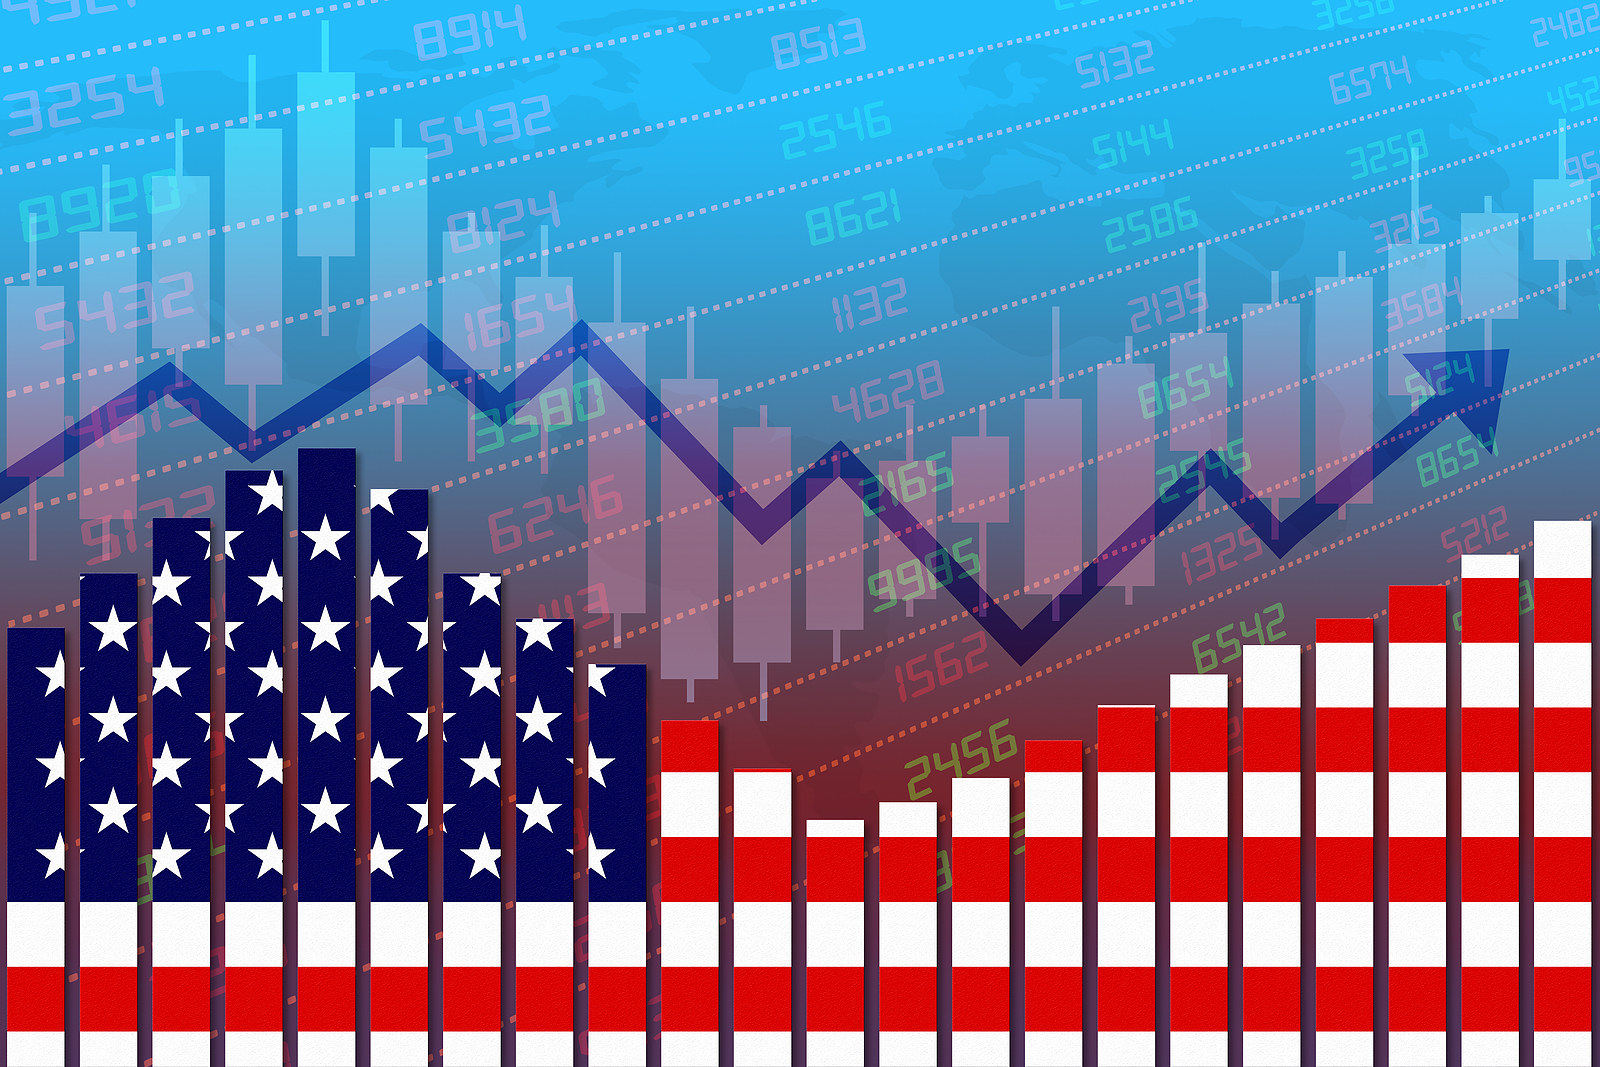 Will US Economy Lead the Way on Global Growth?